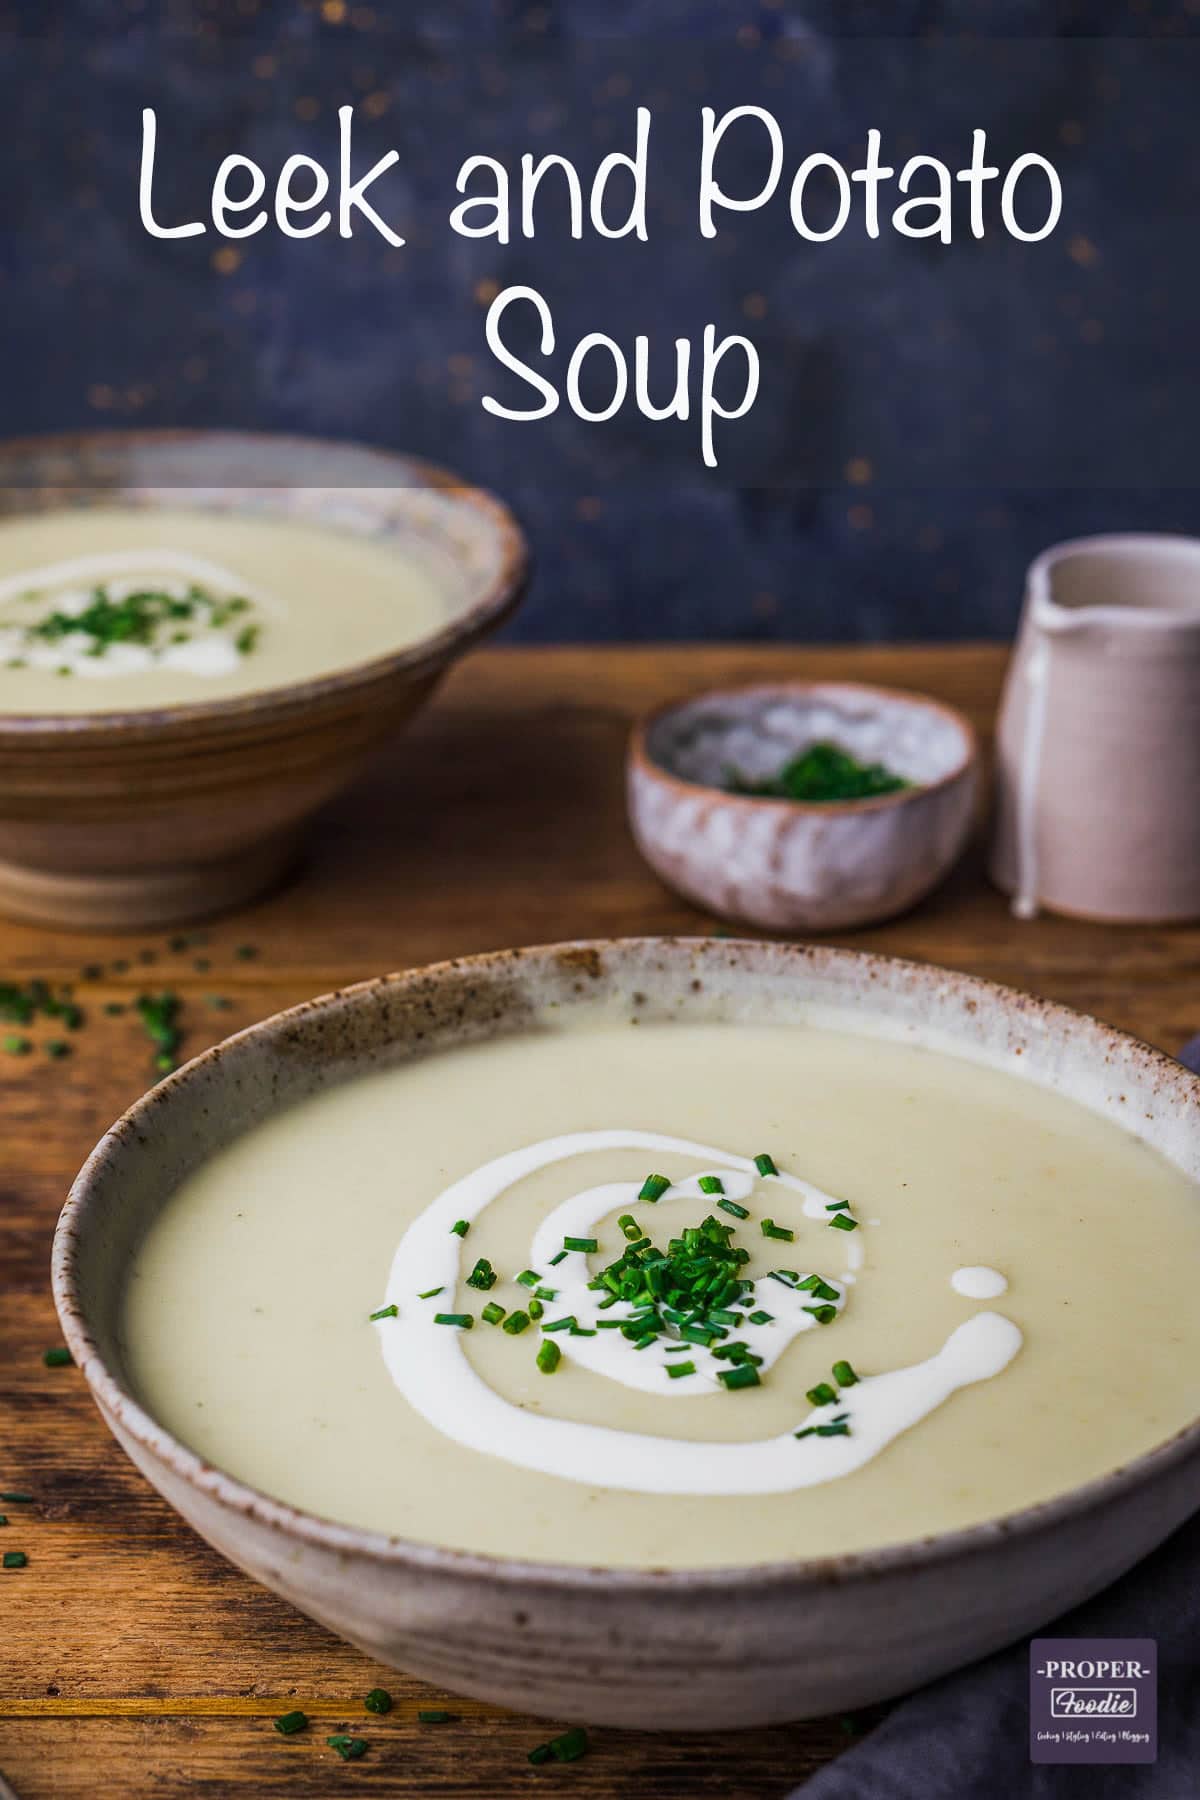 Leek and Potato Soup - Creamy and Nutritious - Proper Foodie